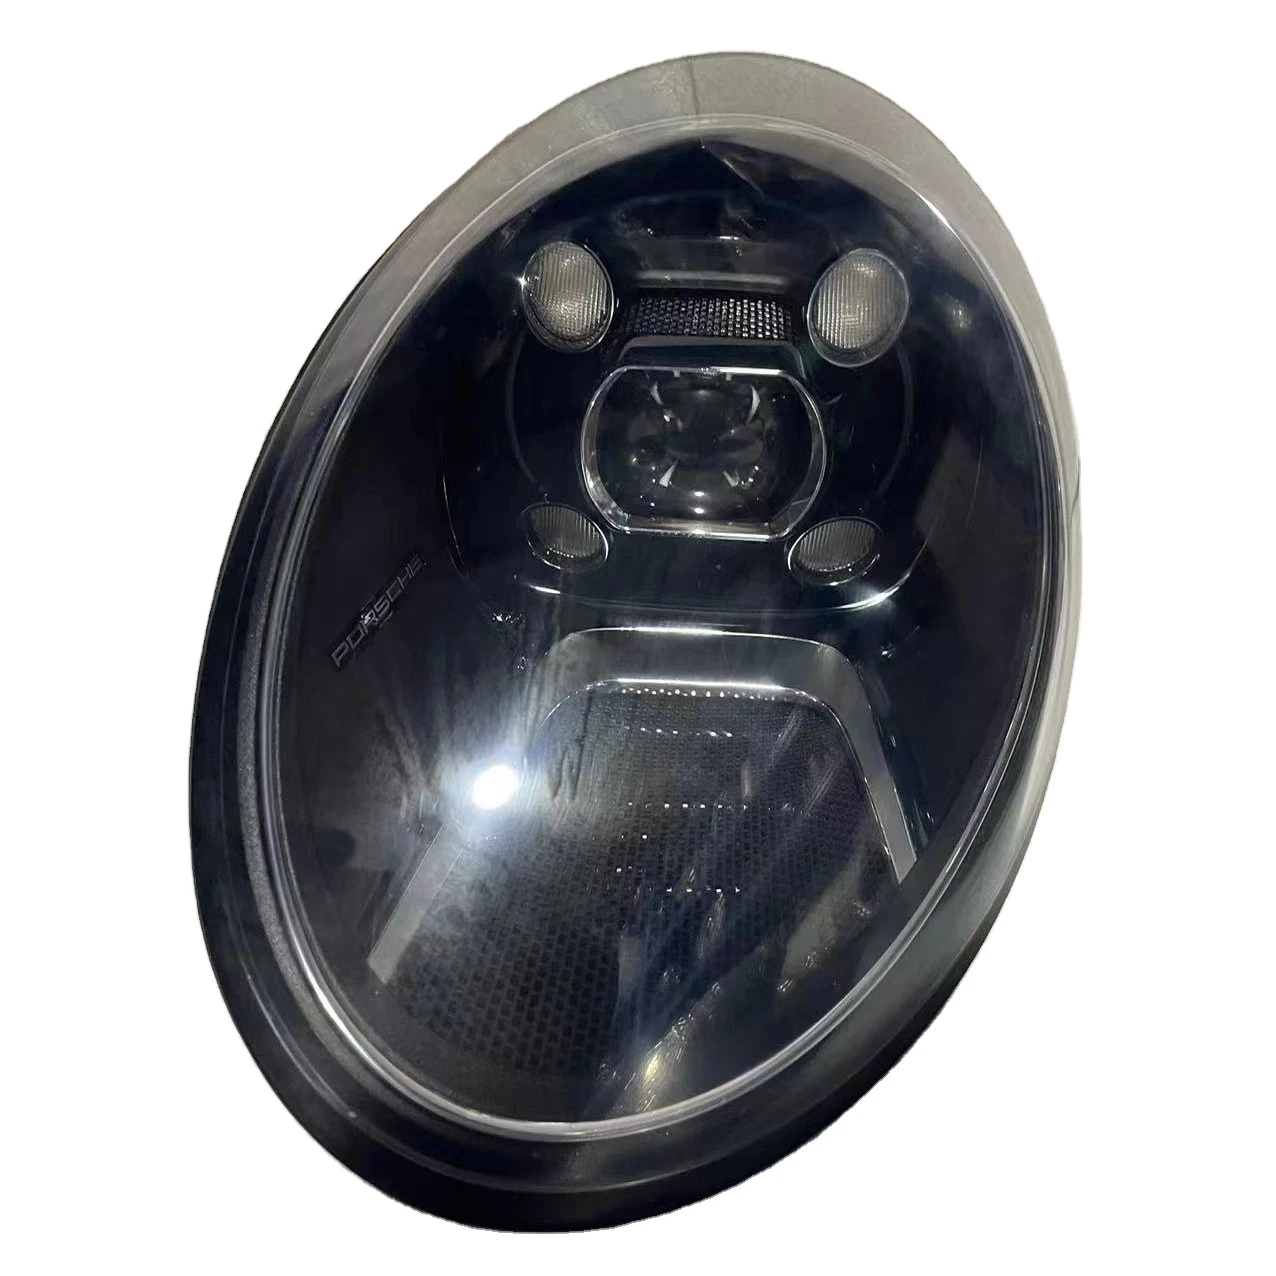 

Suitable for 20-22 Porsche low 992.1 headlight assembly low to high matrix LED automotive lighting system parts